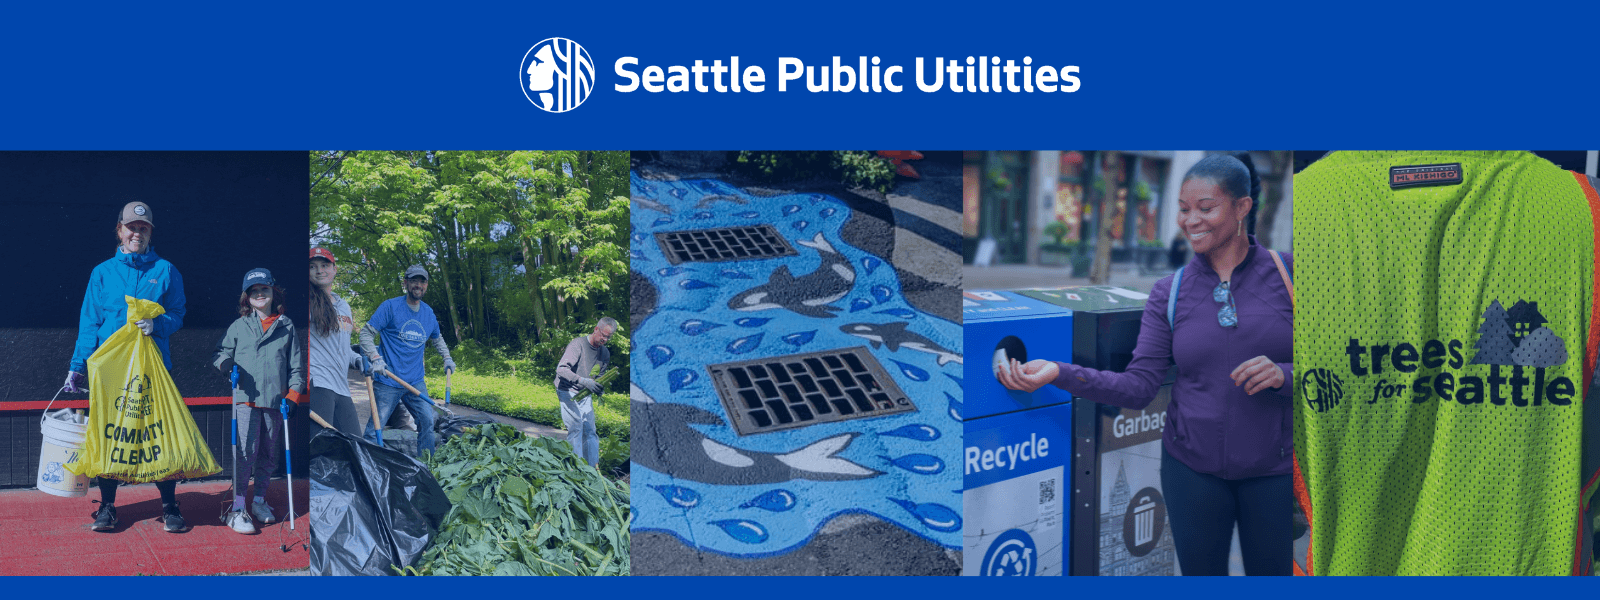 Seattle Public Utilities logo above a collage of photos showing community members engaged in environmental activities like community cleanup, green space maintenance, drain painting, and waste sorting.